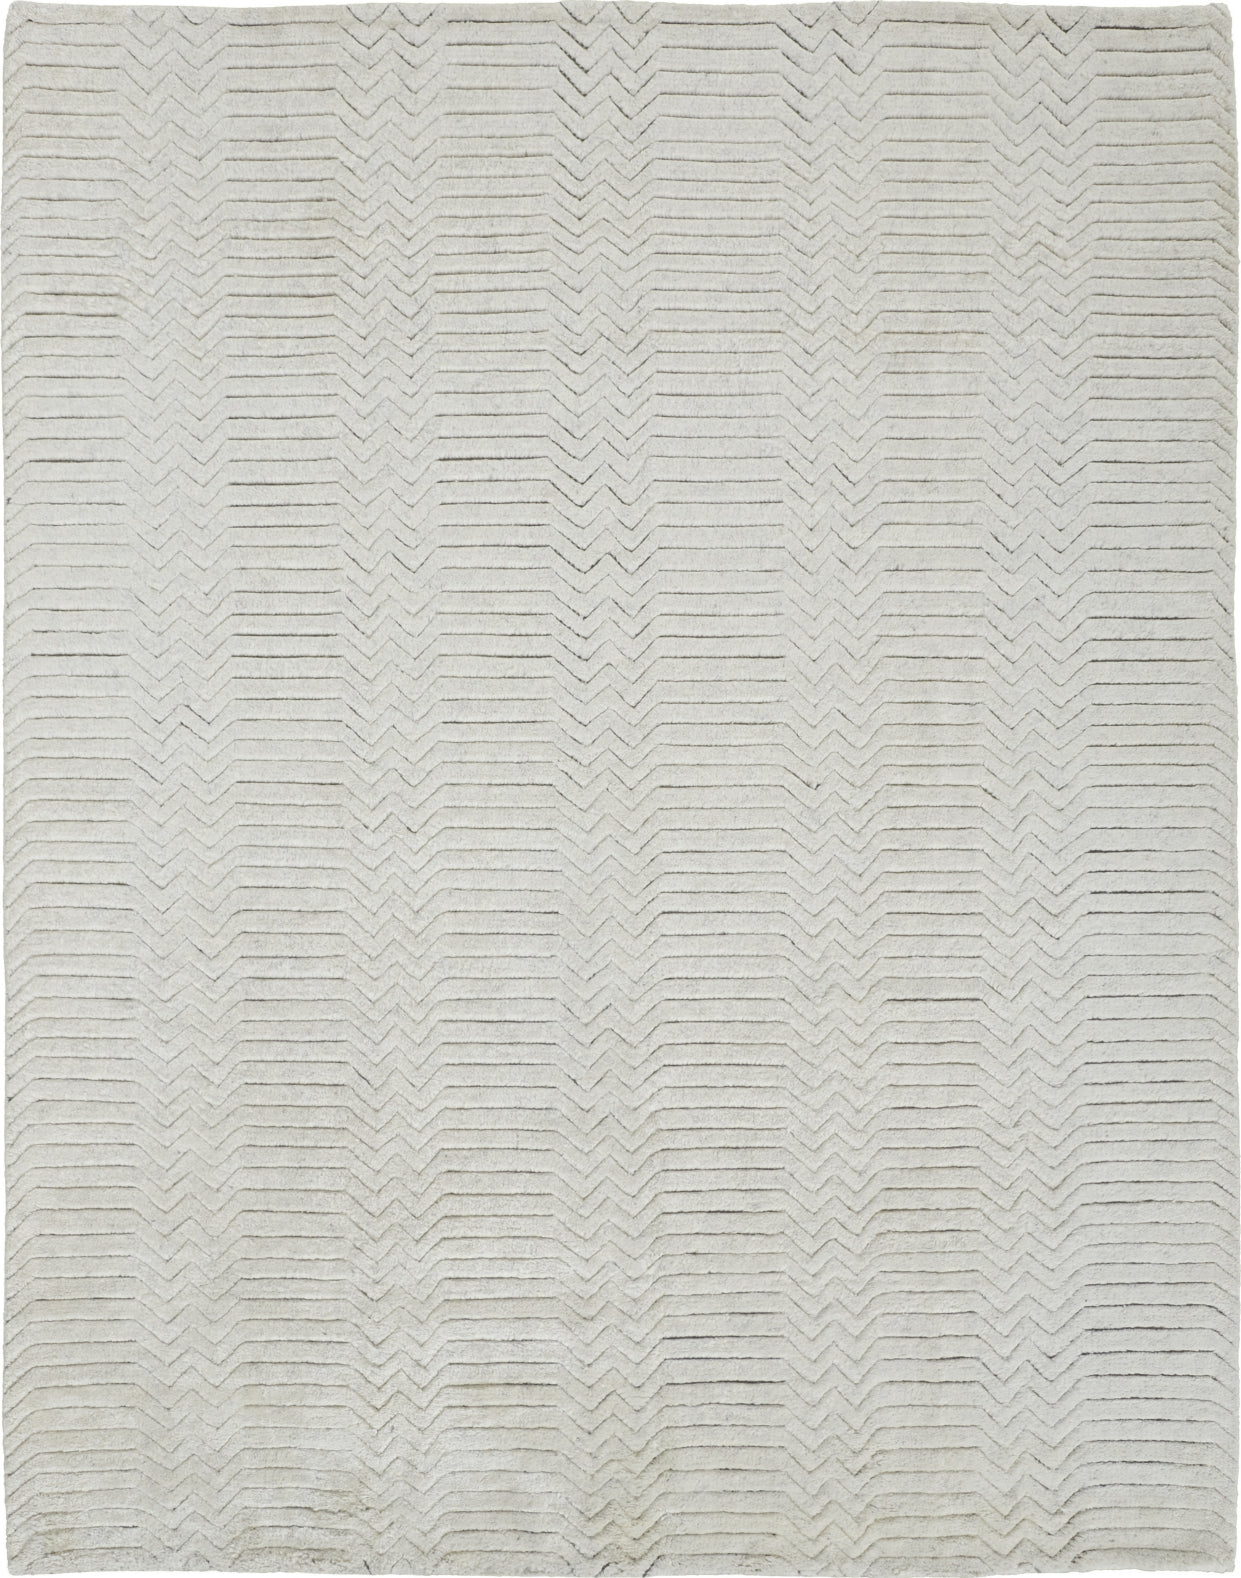 Feizy Matson T6031 Ivory Area Rug by Thom Filicia